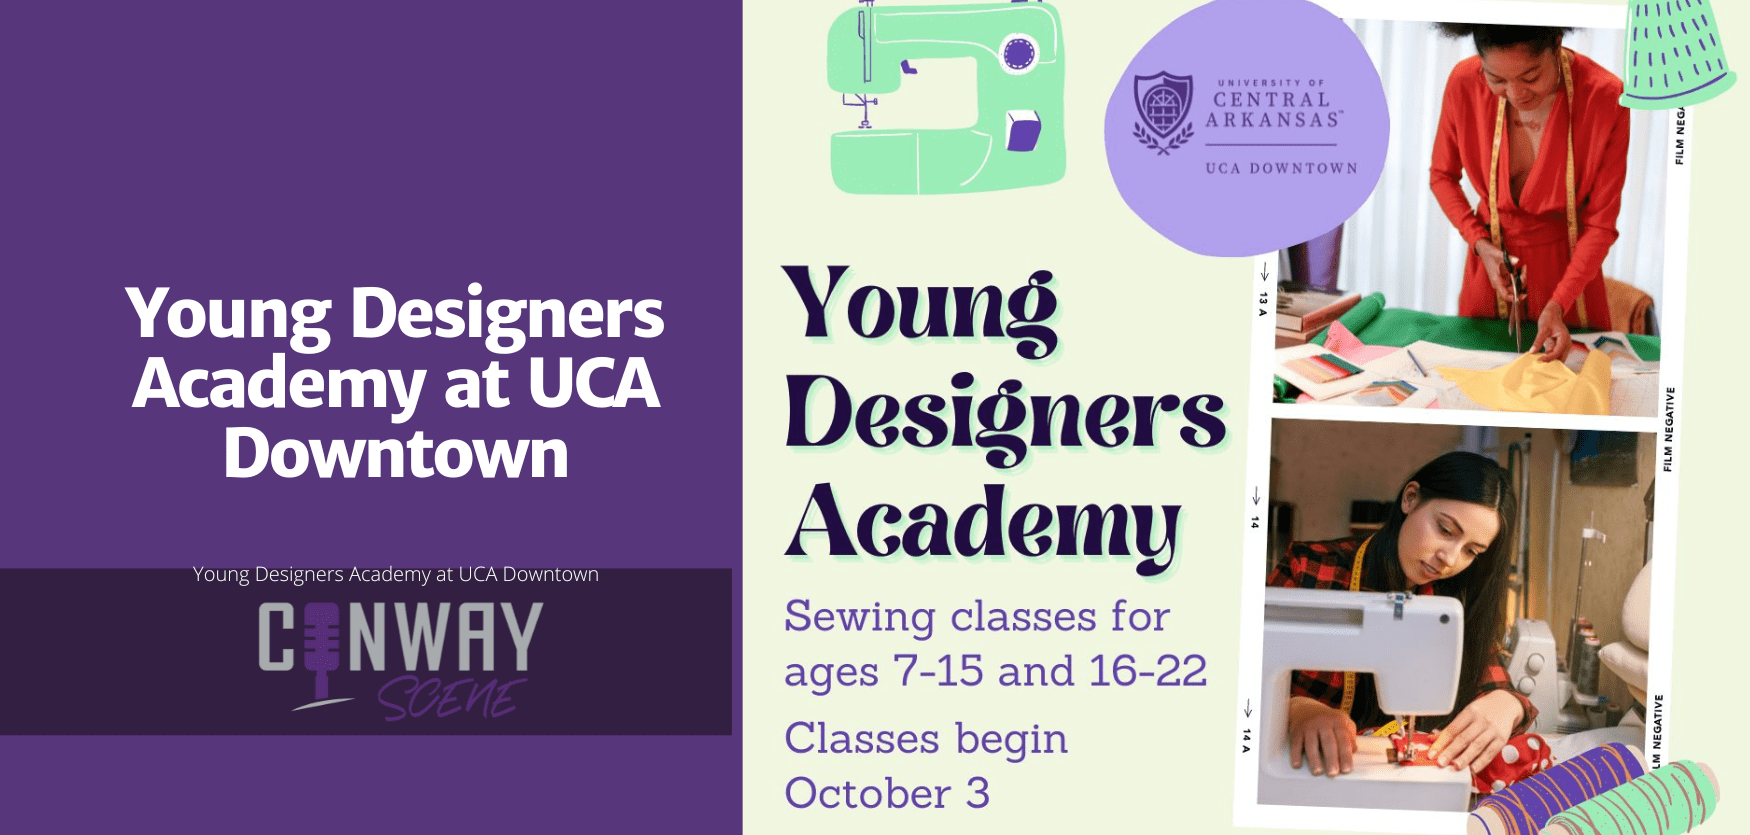 Young Designers Academy at UCA Downtown